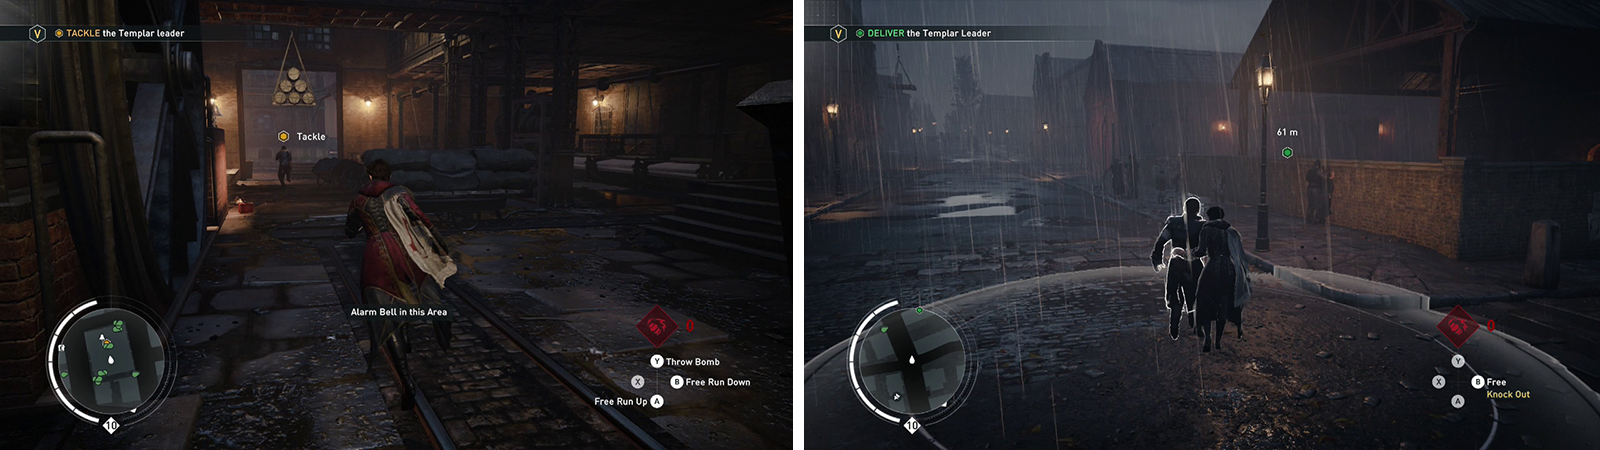 Chase down the target and avoid the explosives (left). Once you have captured him, escort him back to the dock (right).